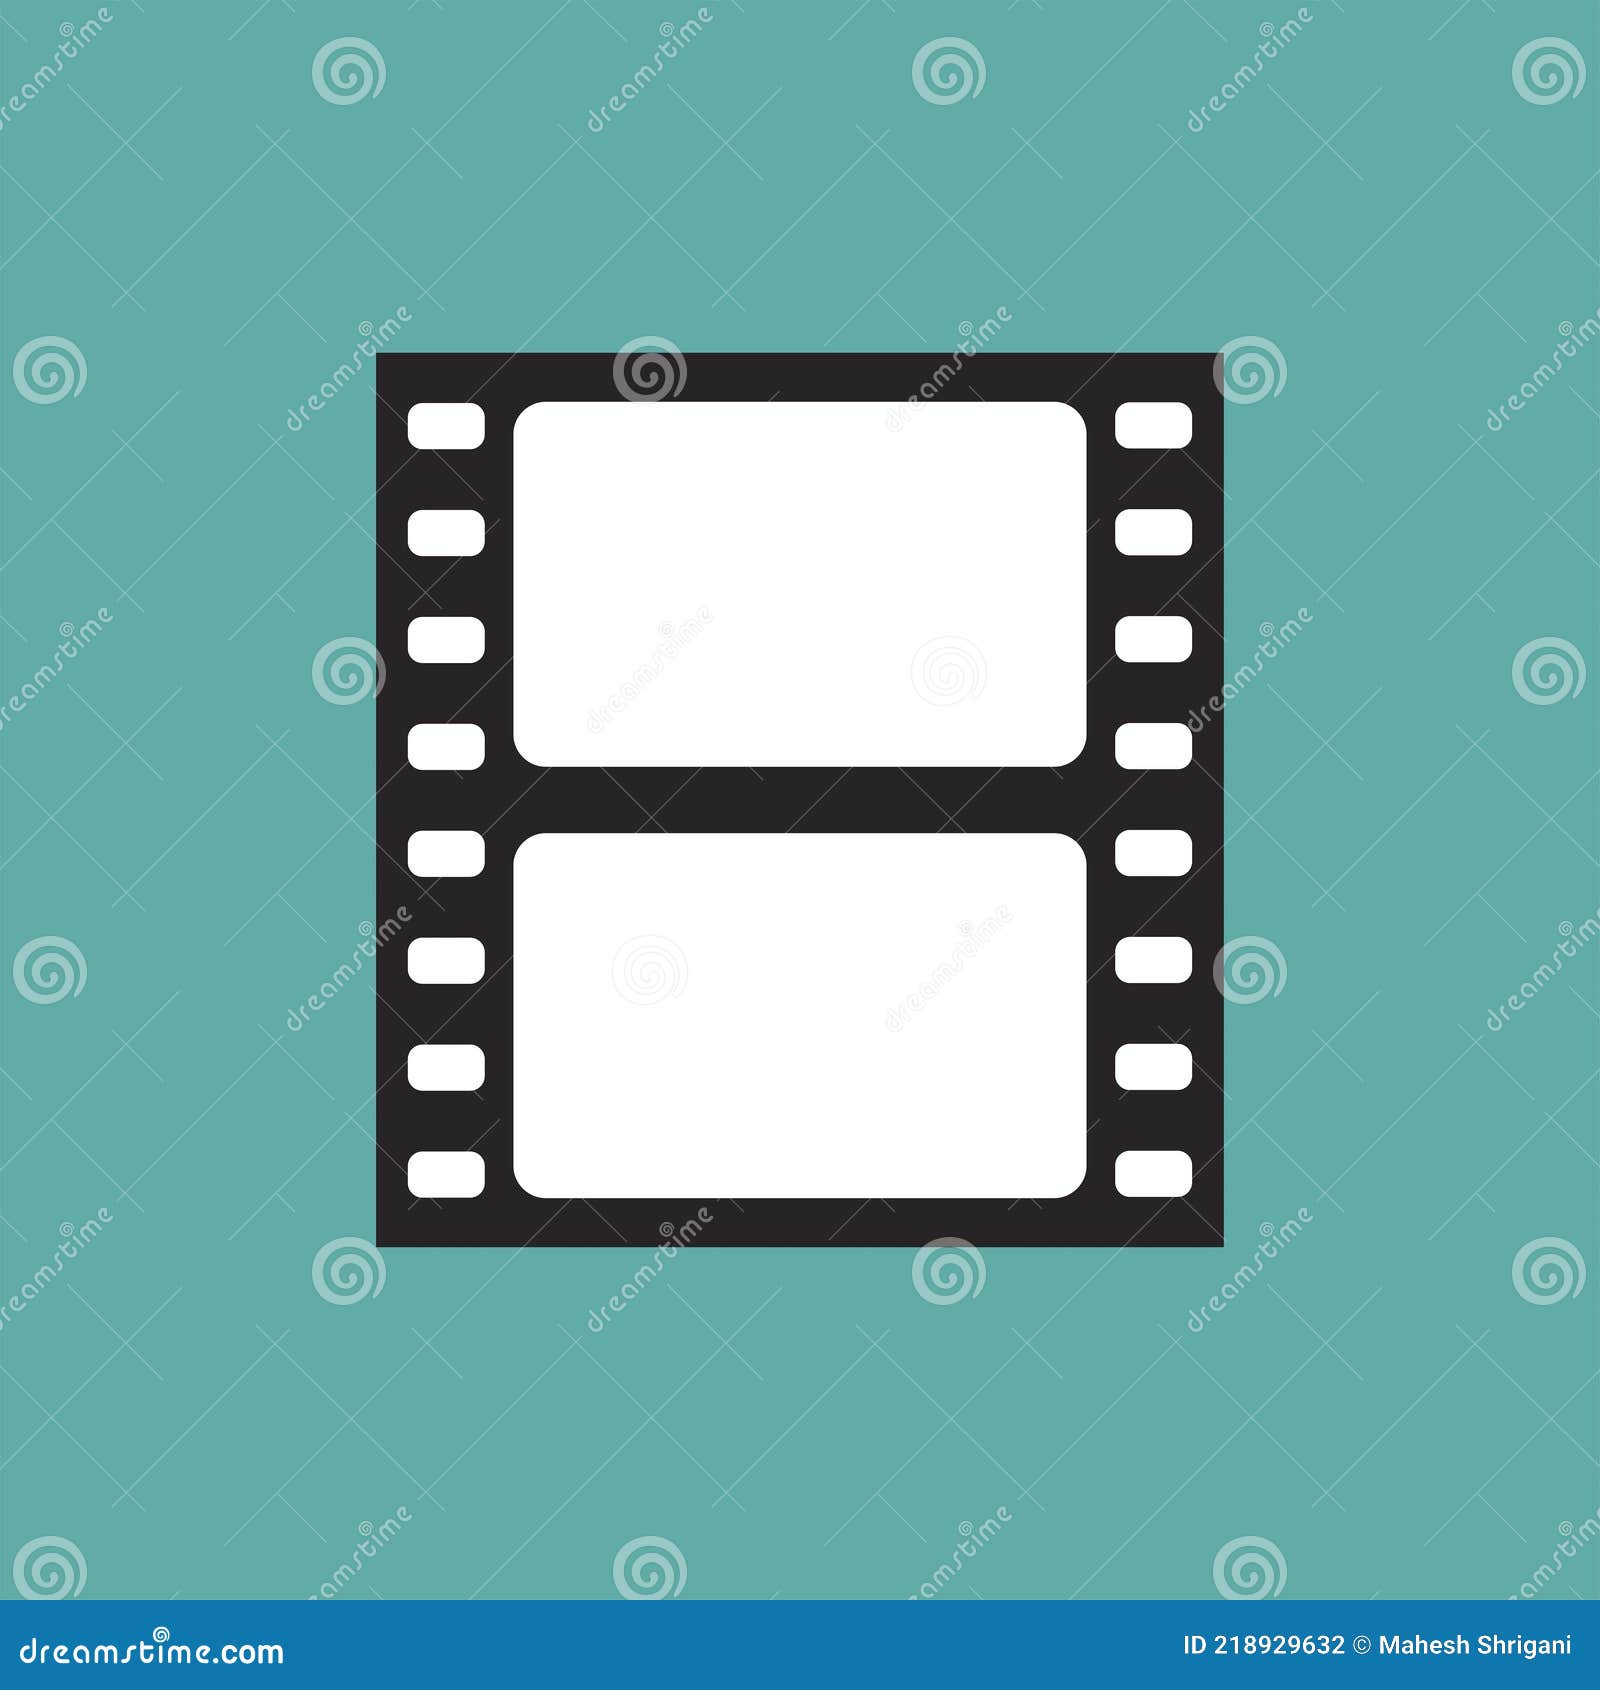 Old Vertical Filmstrip Isolated on Tint Background Stock Vector ...